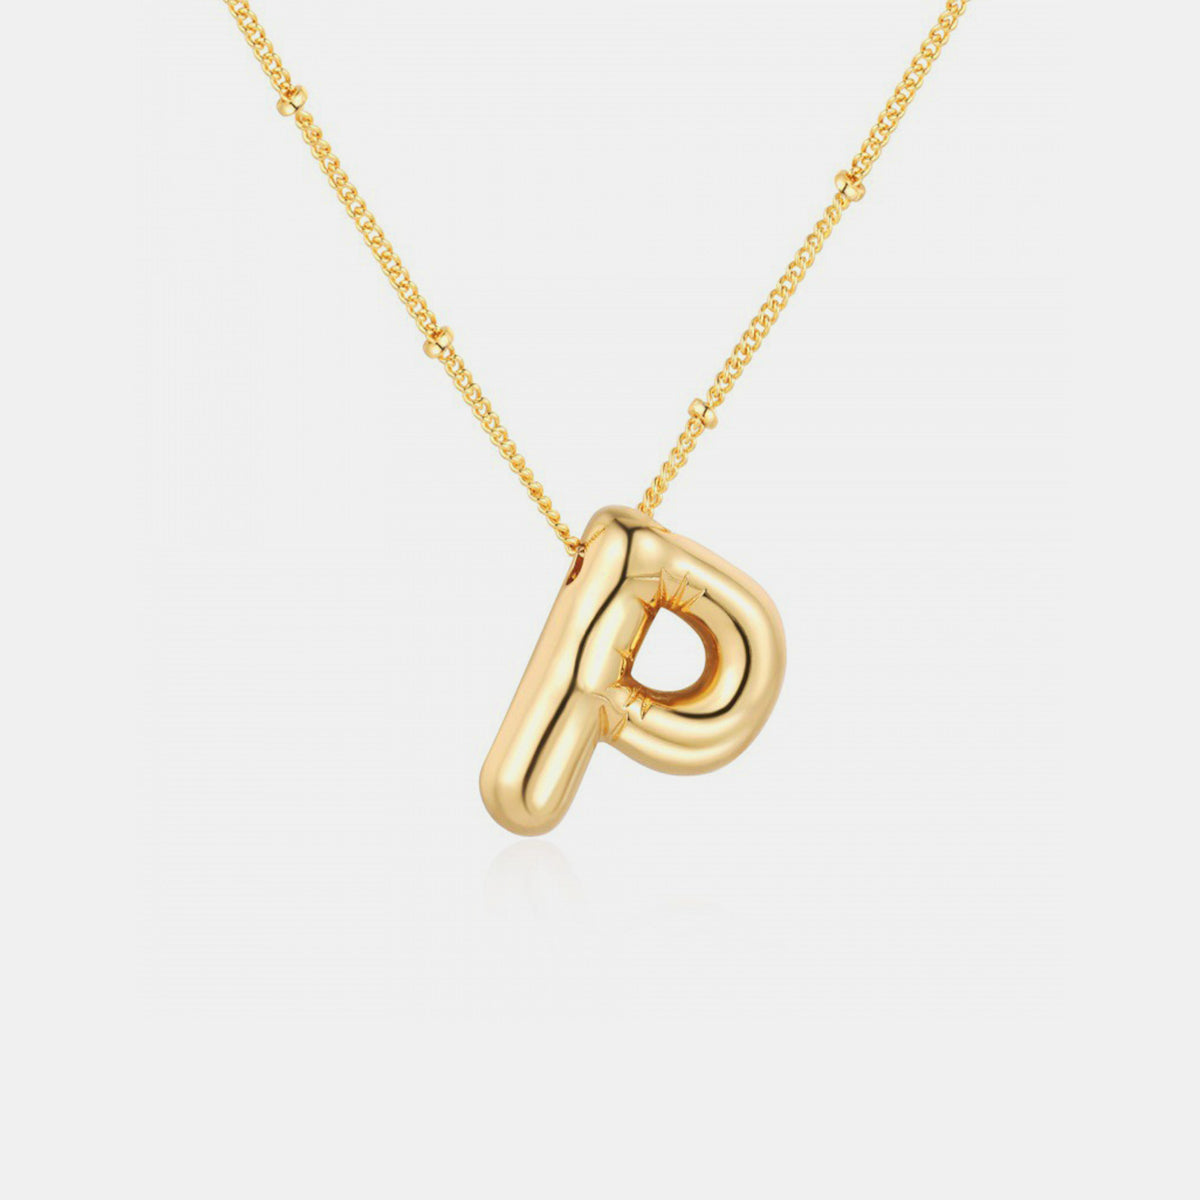 TEEK - K-S Gold-Plated Letter Pendant Necklace JEWELRY TEEK Trend Style P  